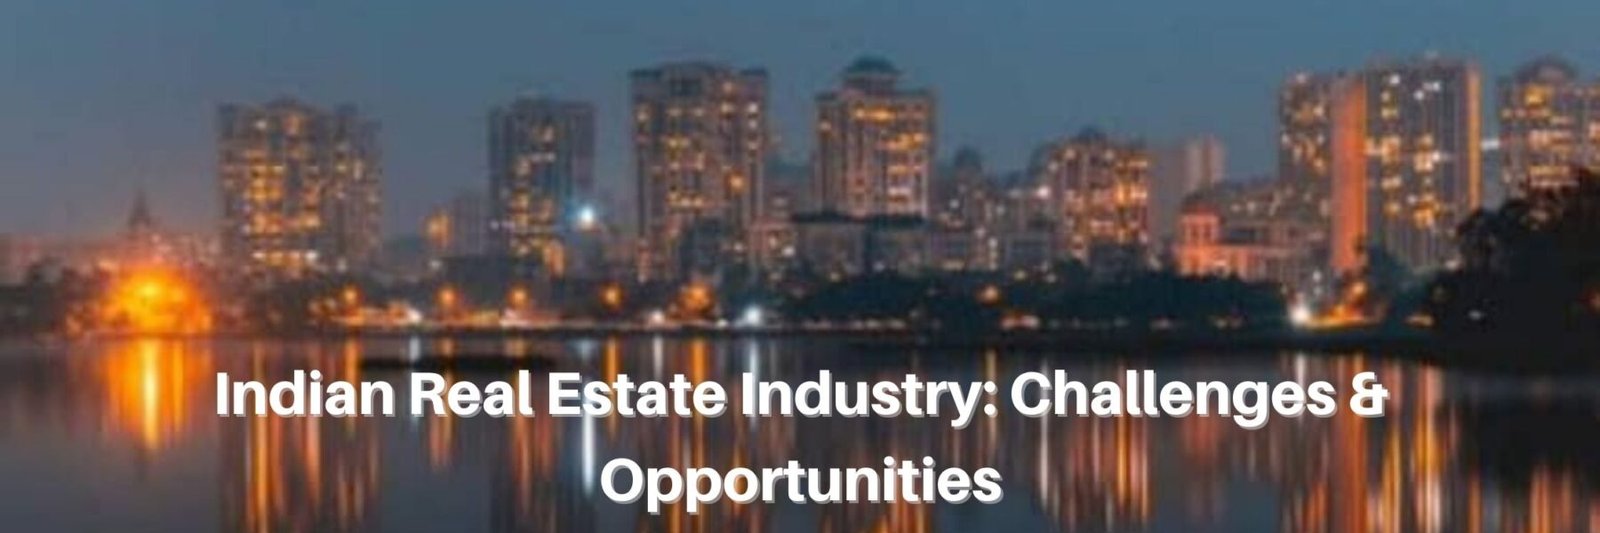 Indian Real Estate Industry Challenges & Opportunities (1)